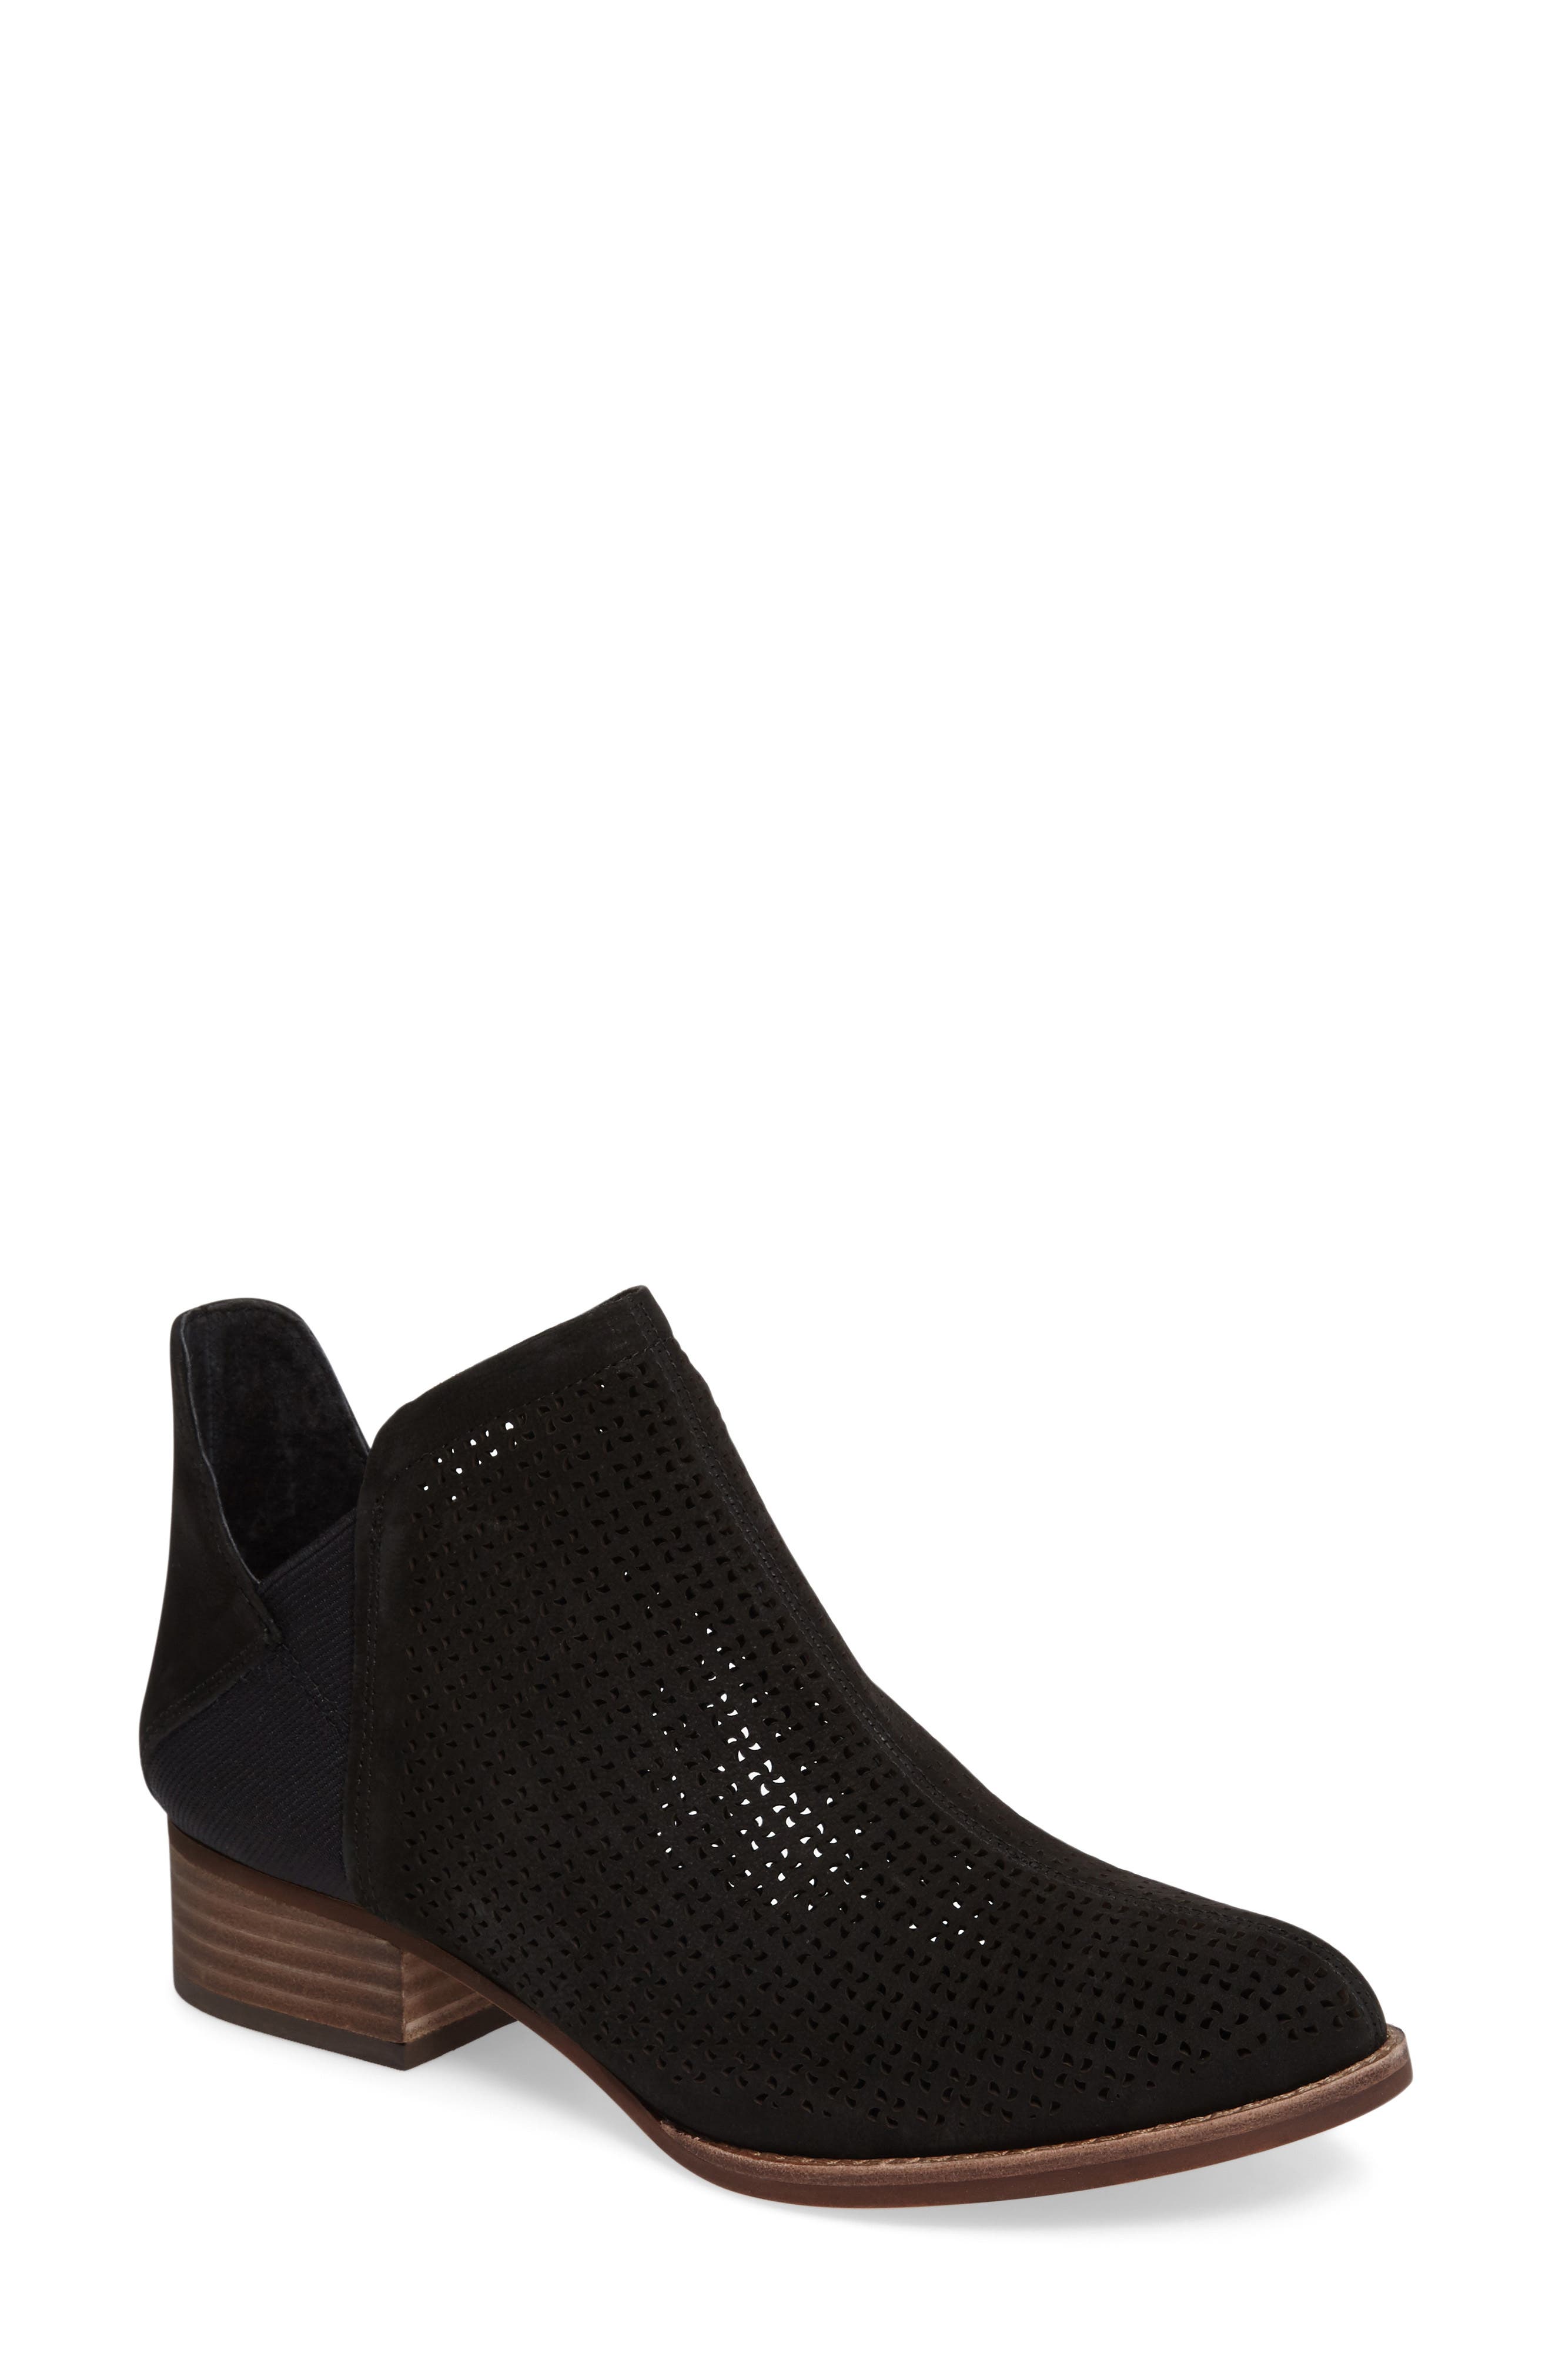 Vince Camuto Celena Perforated Bootie 